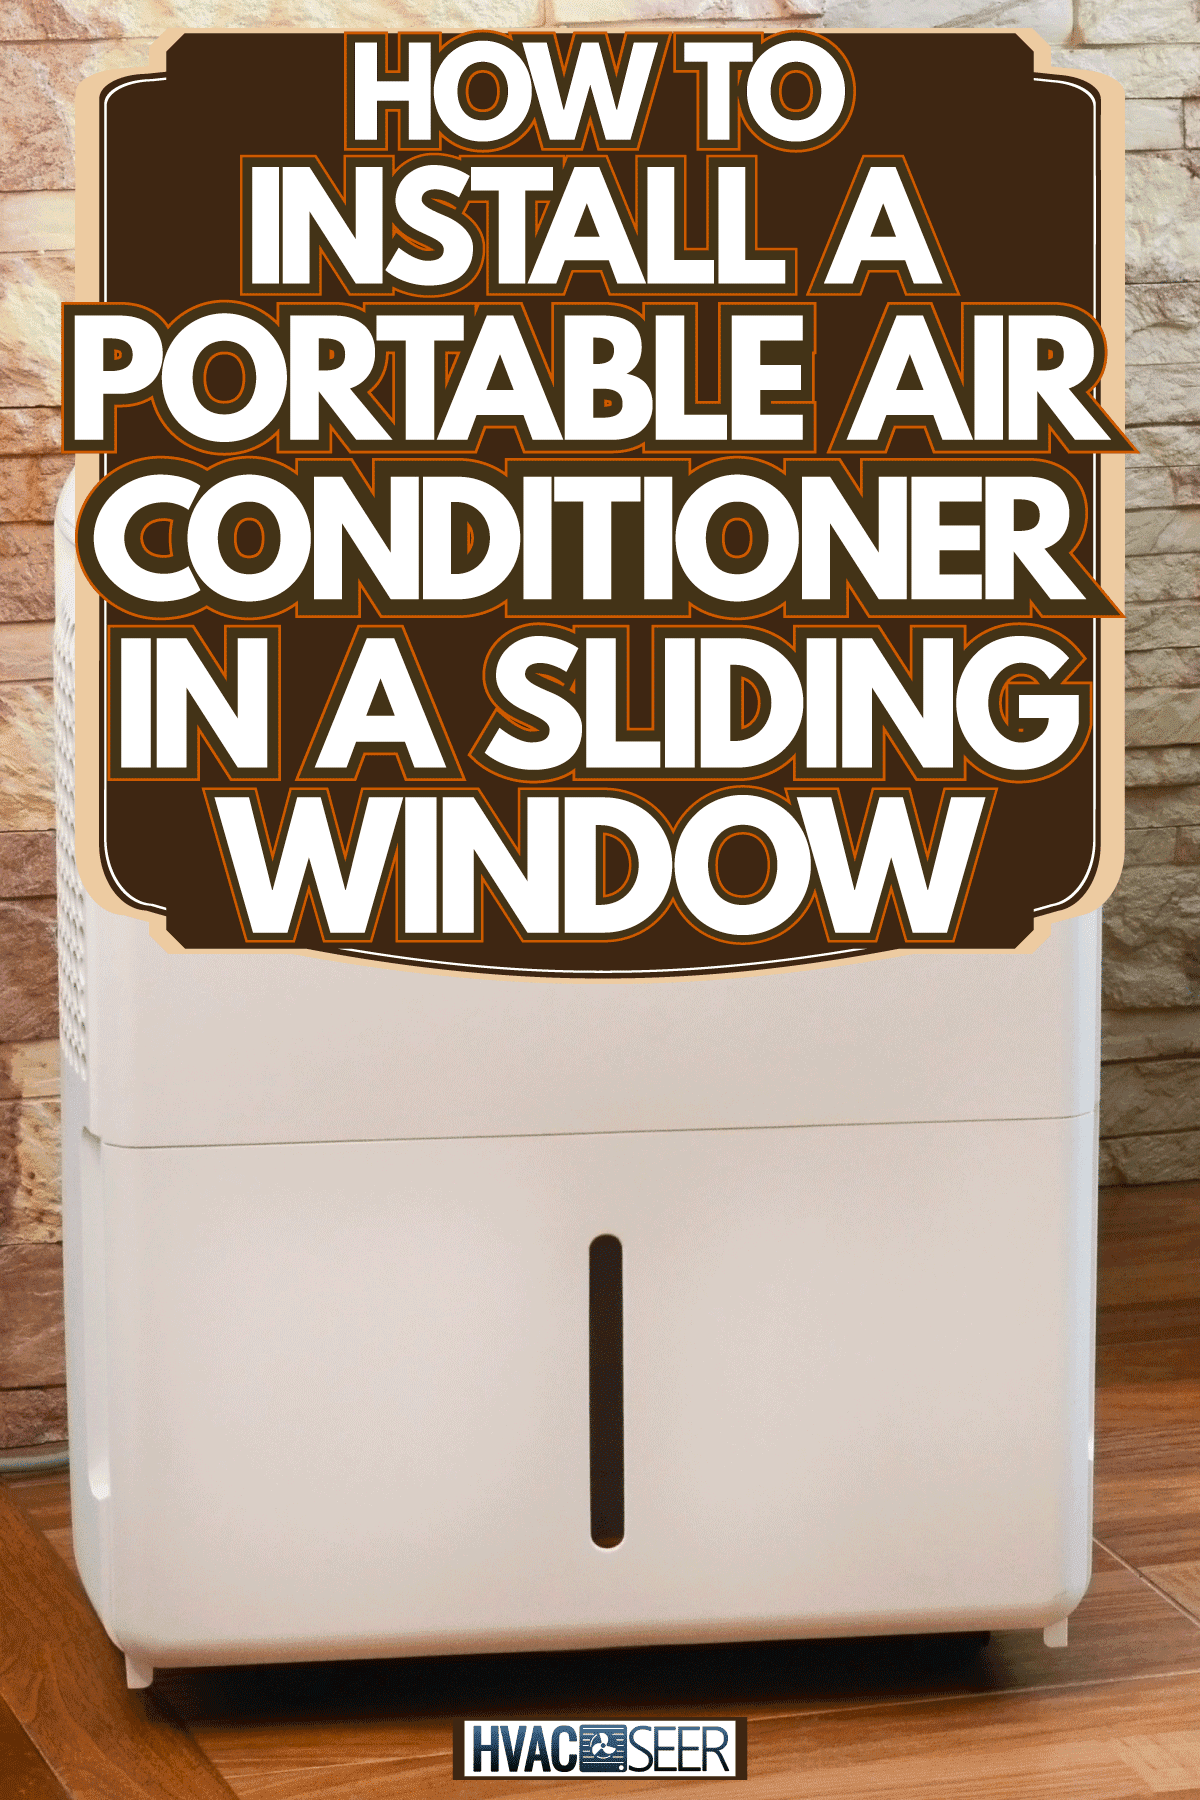 Two portable air conditioning units in the living rom, How To Install A Portable Air Conditioner In A Sliding Window